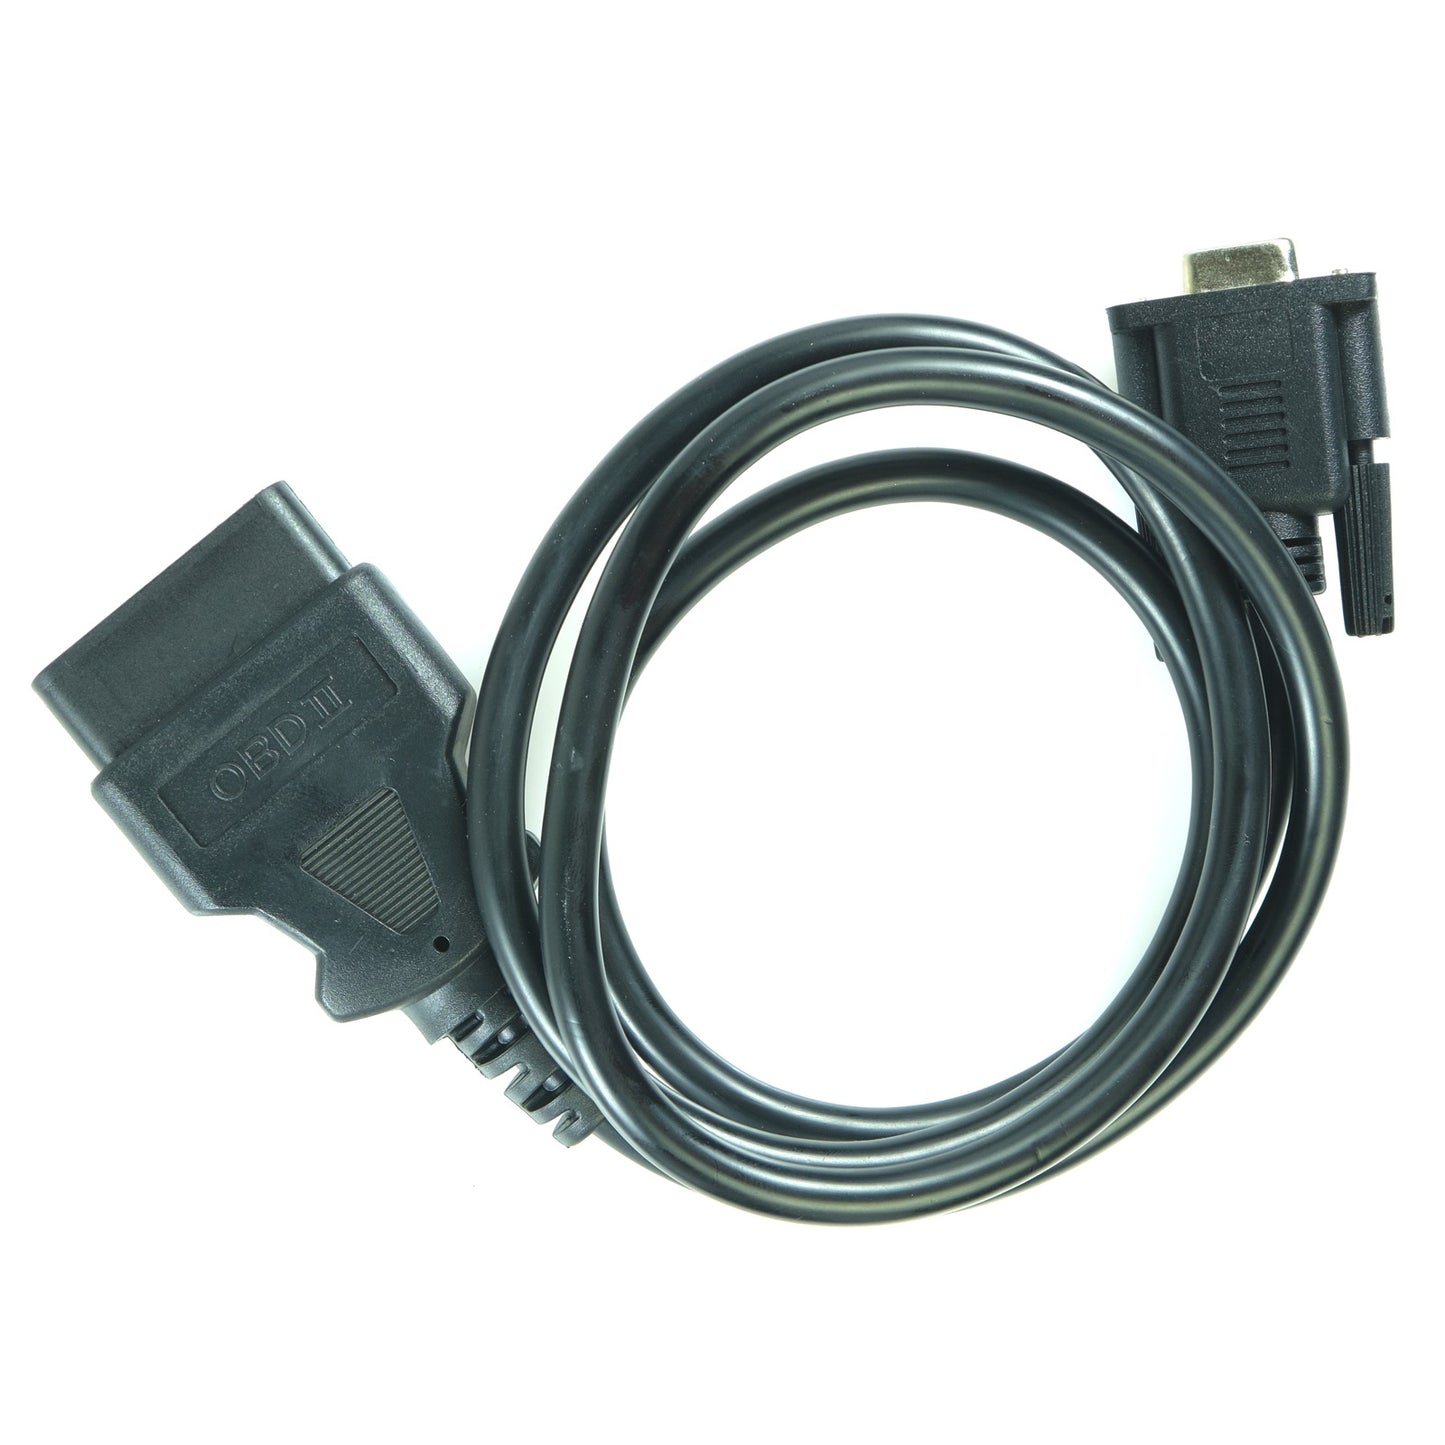 DB9 to OBD2 Cable for CAN Shield